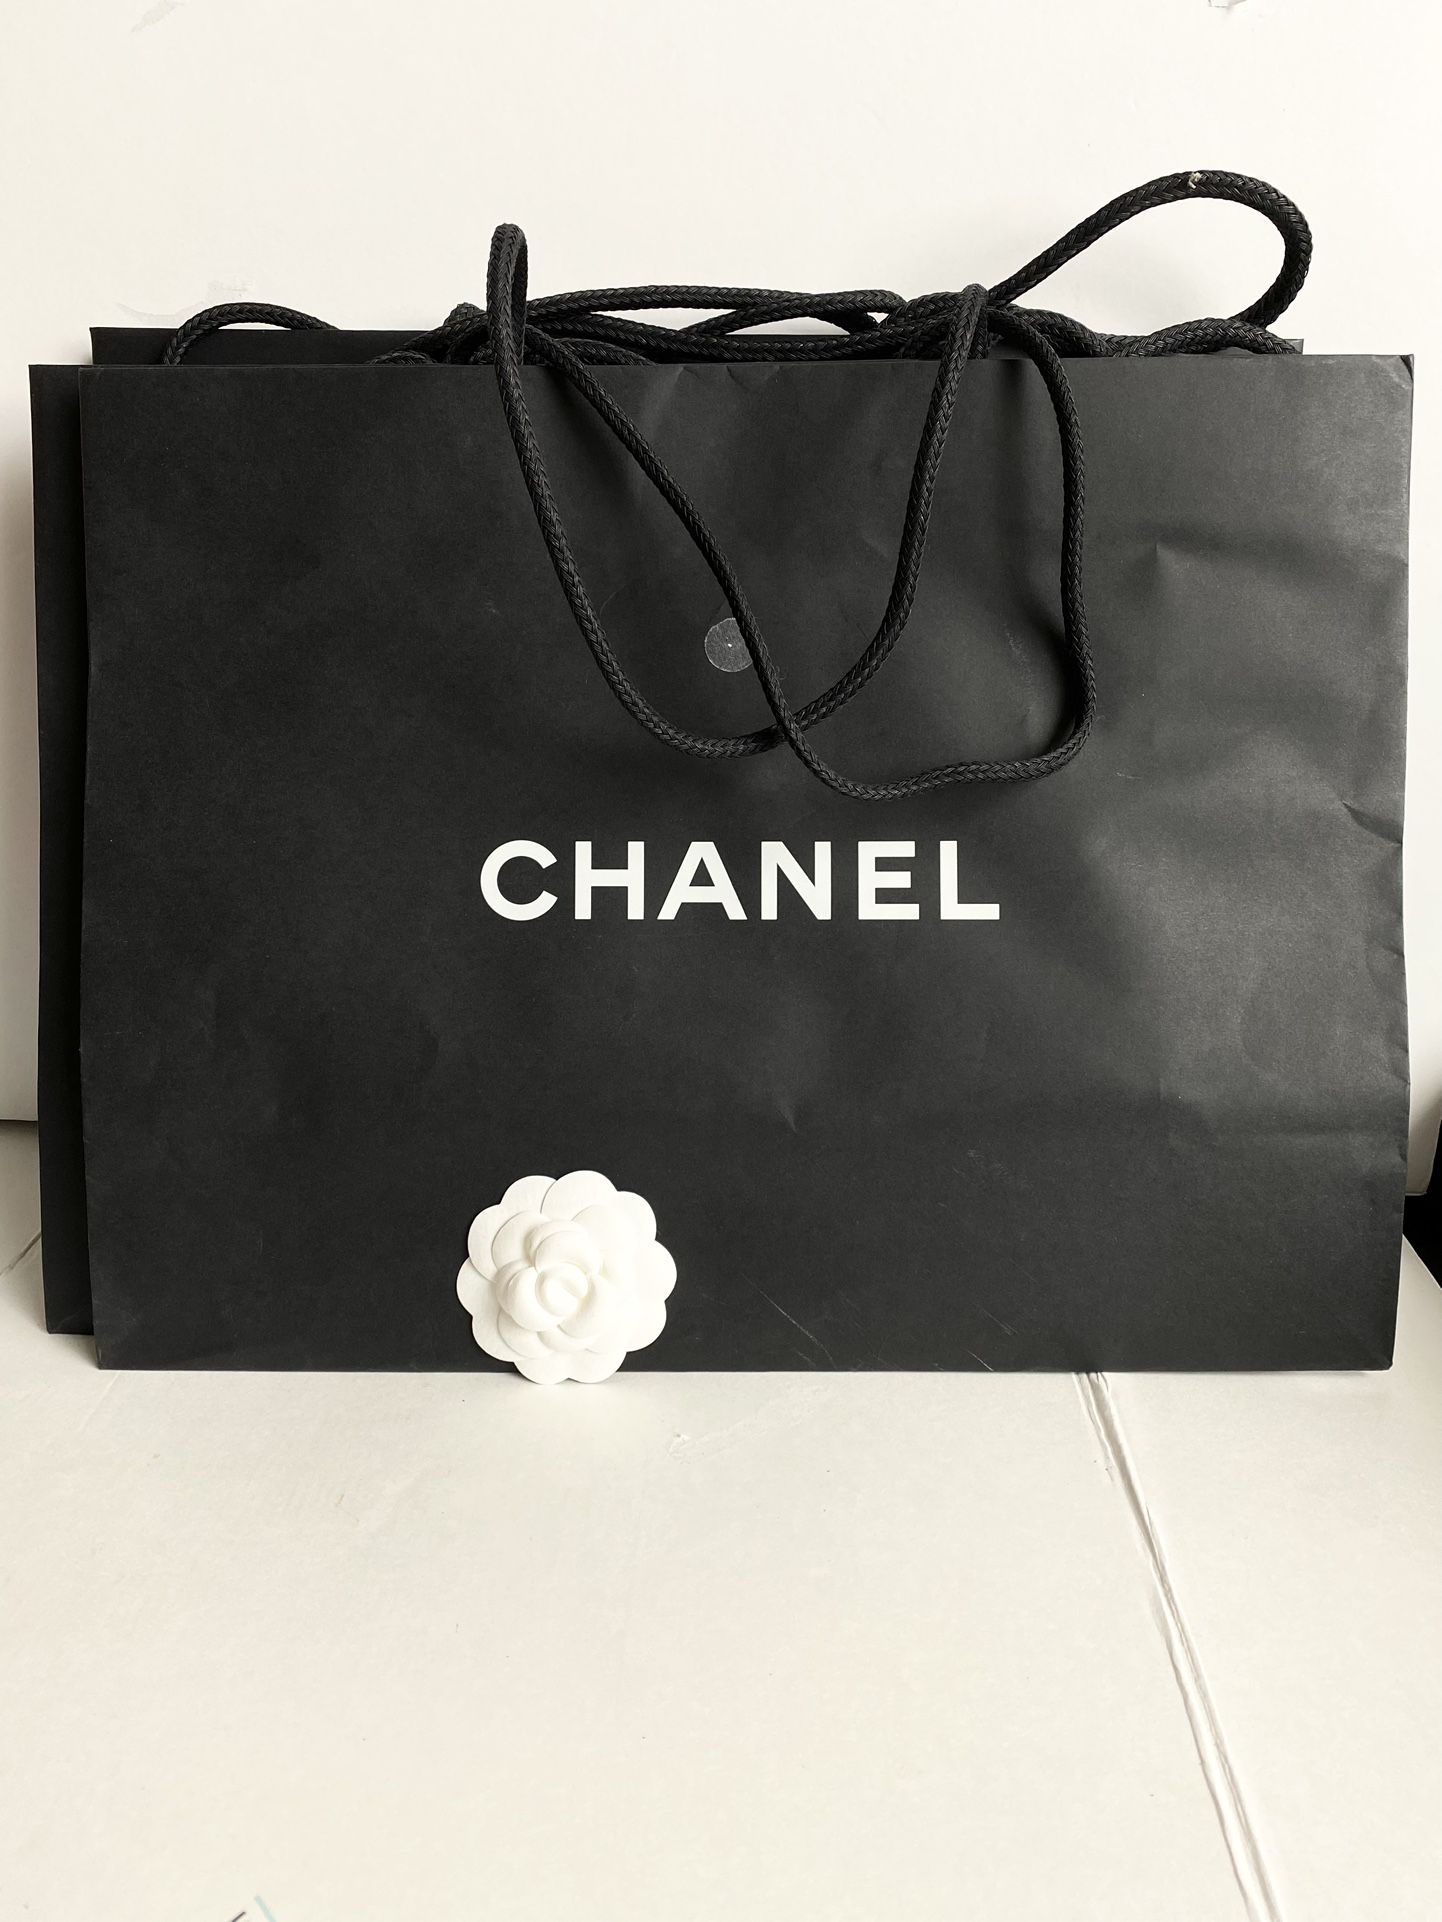 Chanel Gift Bag Empty for Sale in City Of Industry, CA - OfferUp